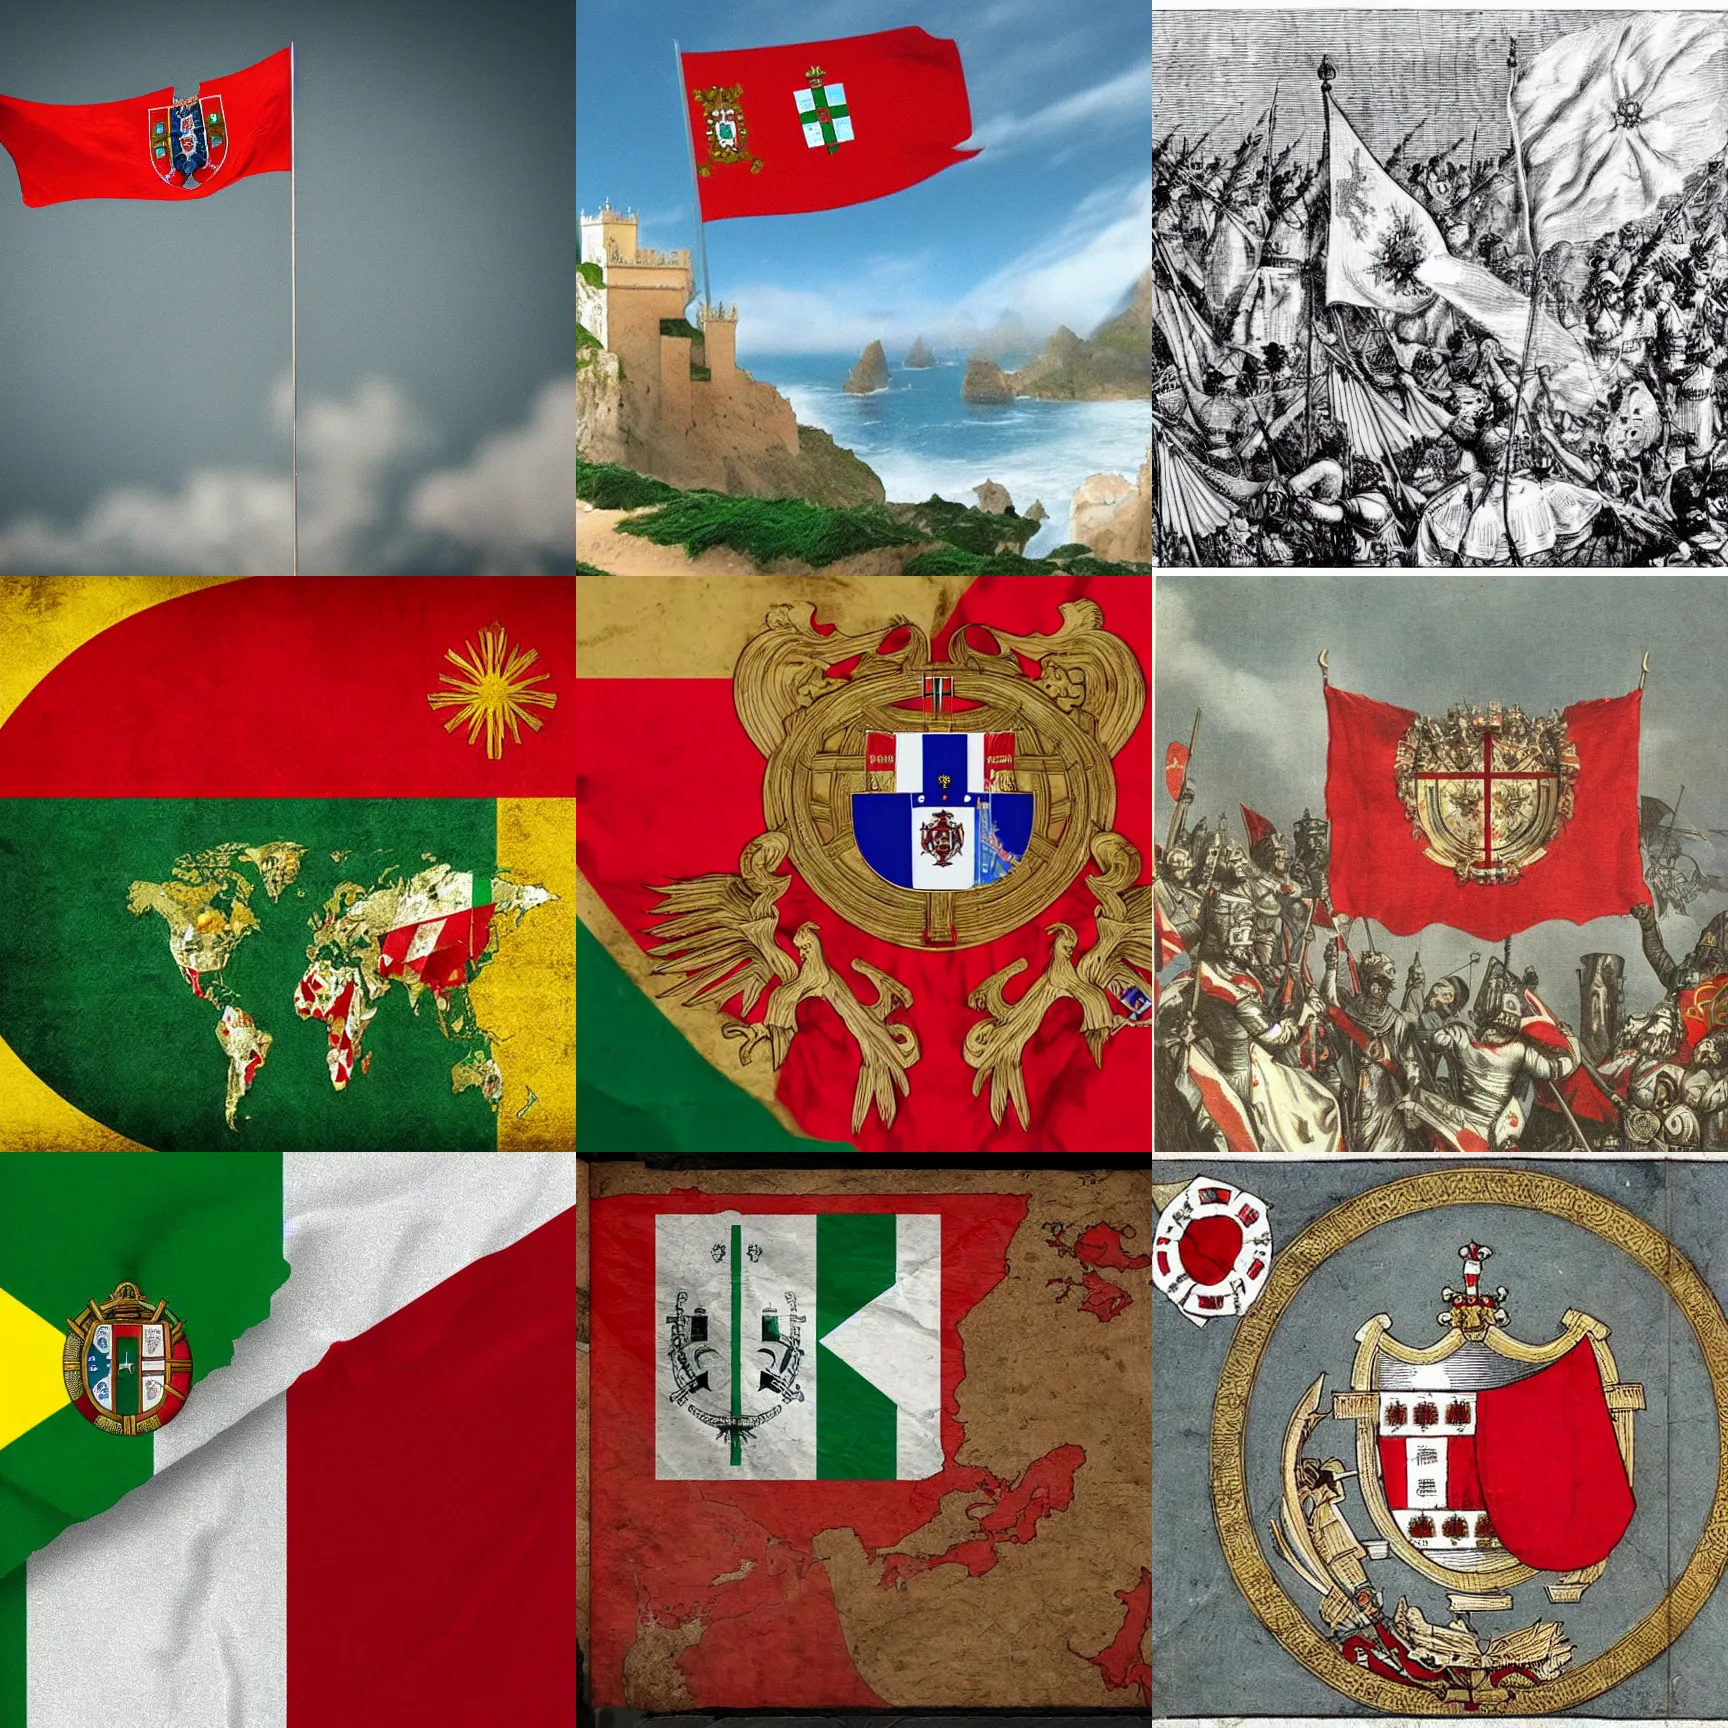 Prompt: portugal conquering the world, with the flag of portugal being shown